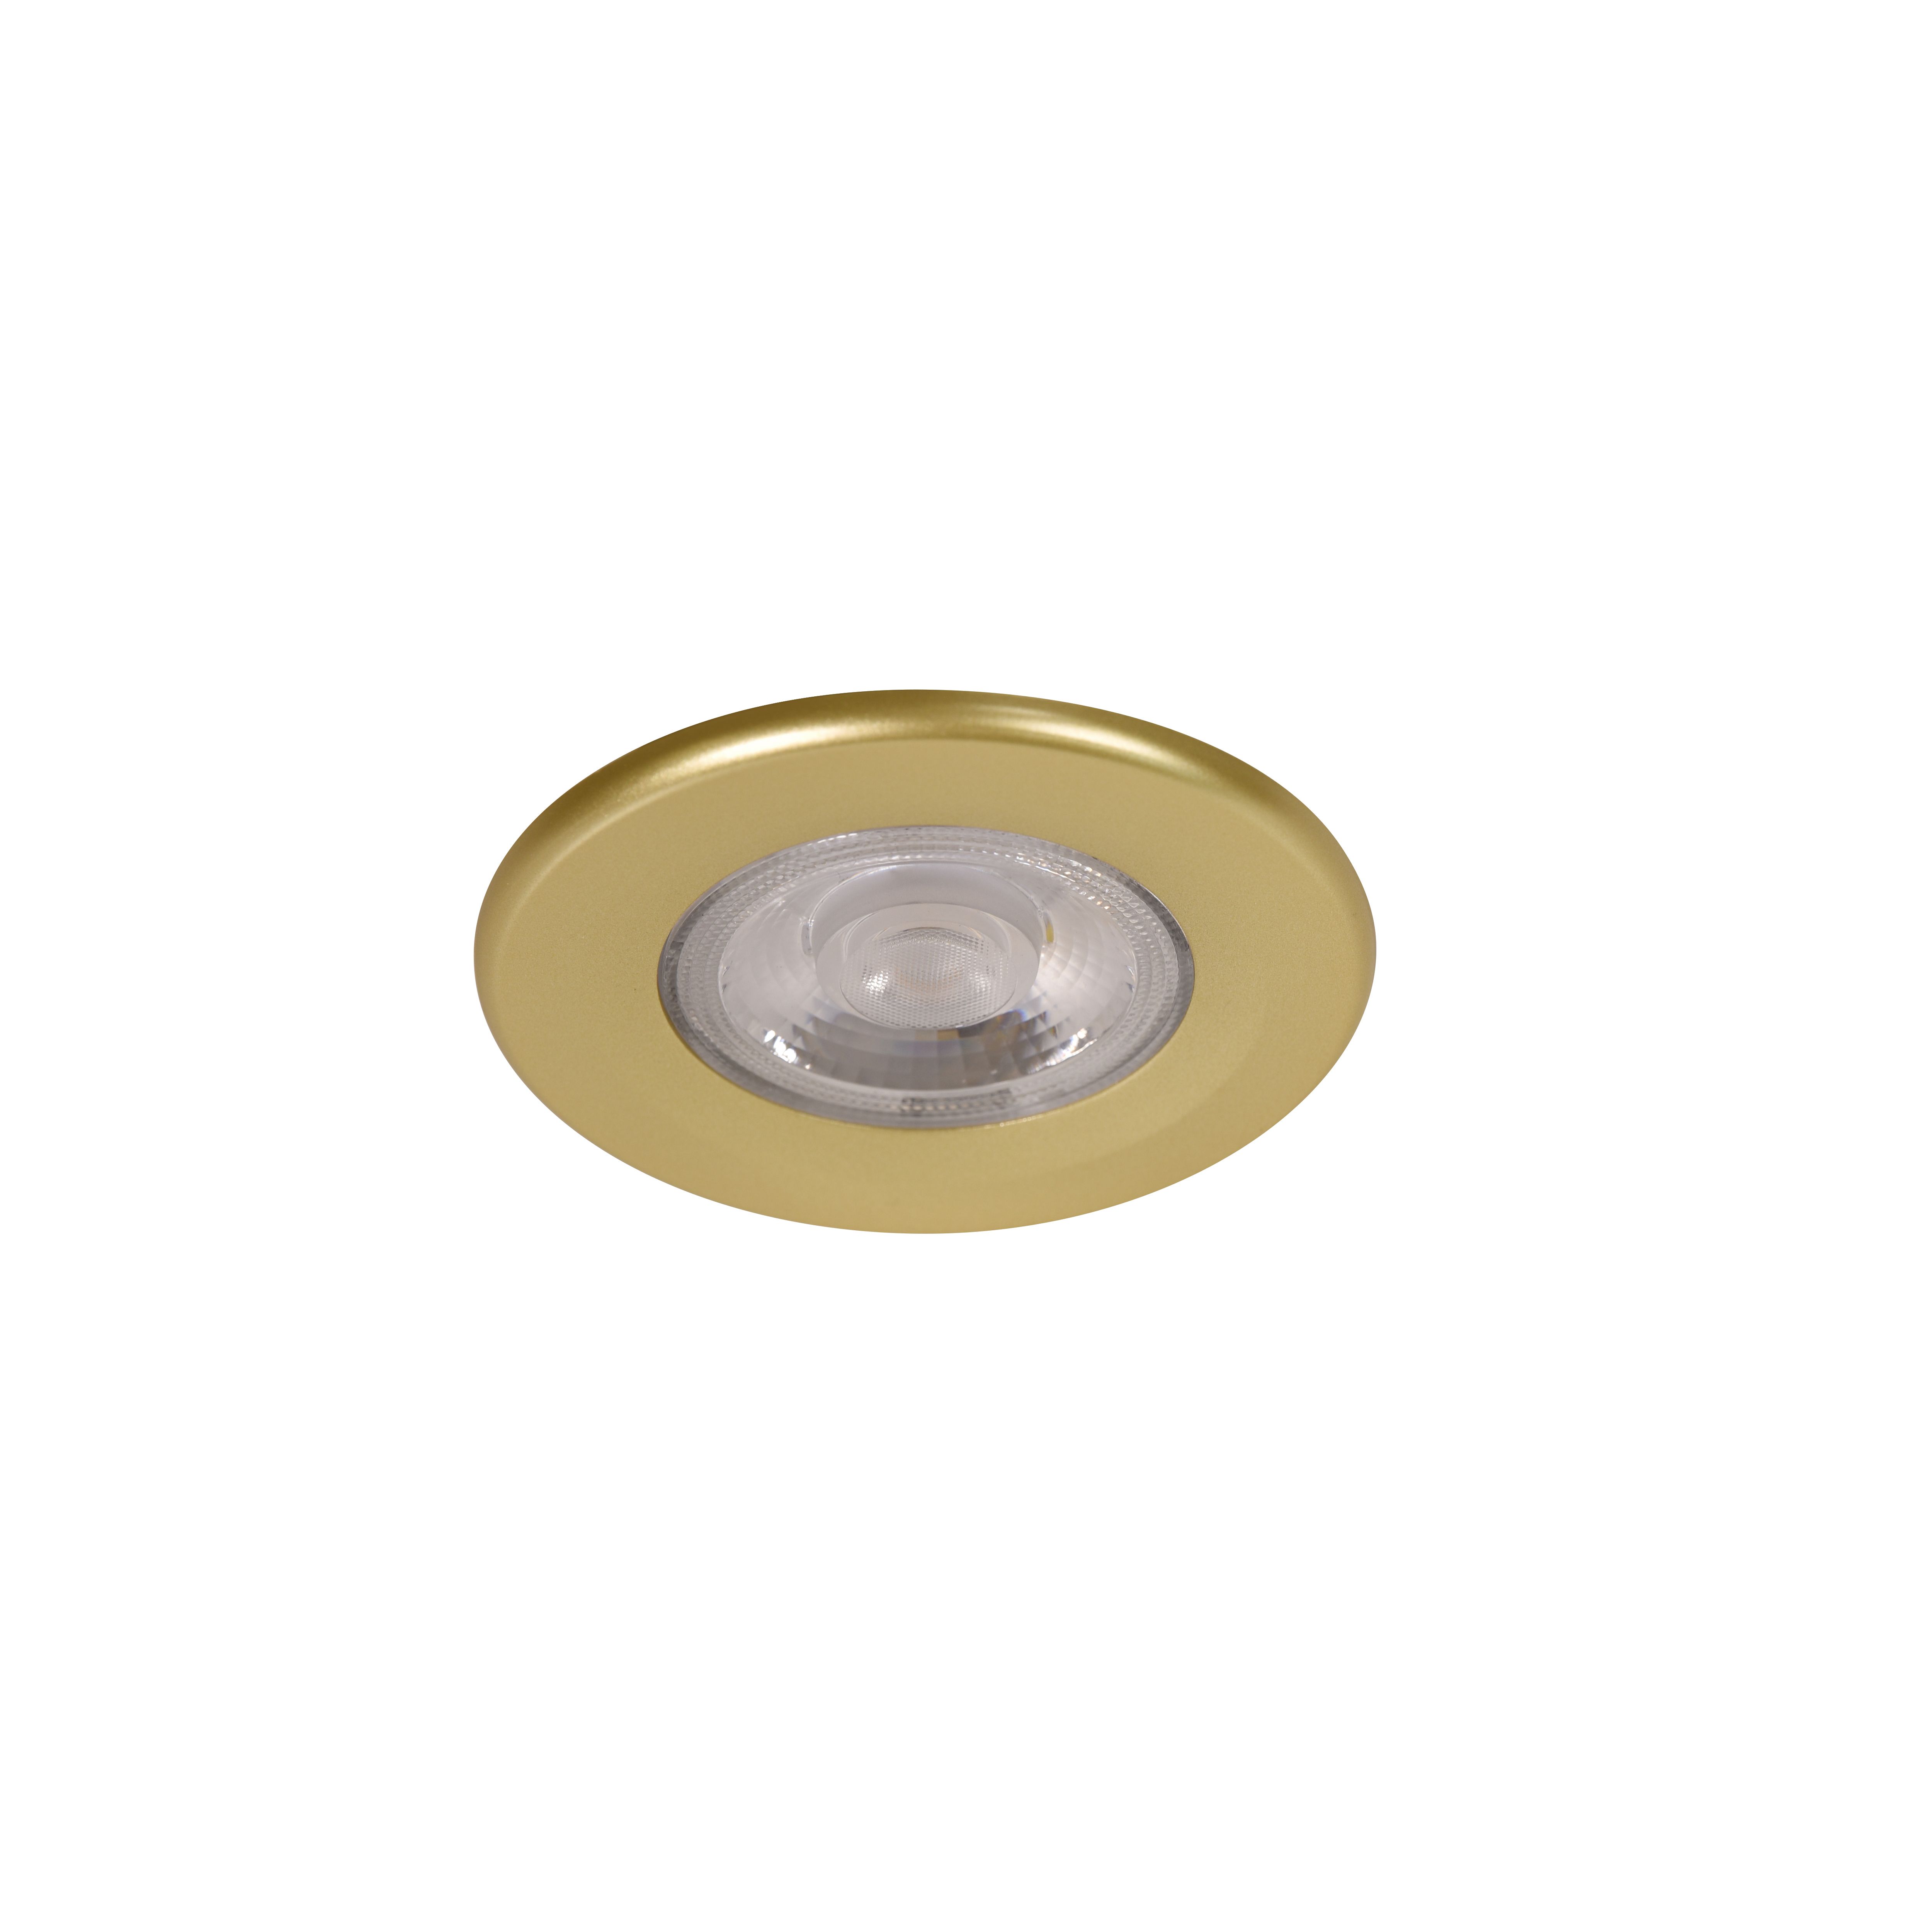 Gamow Matt Gold effect Fixed LED Fire-rated Warm & neutral Downlight 5W IP65, Pack of 3